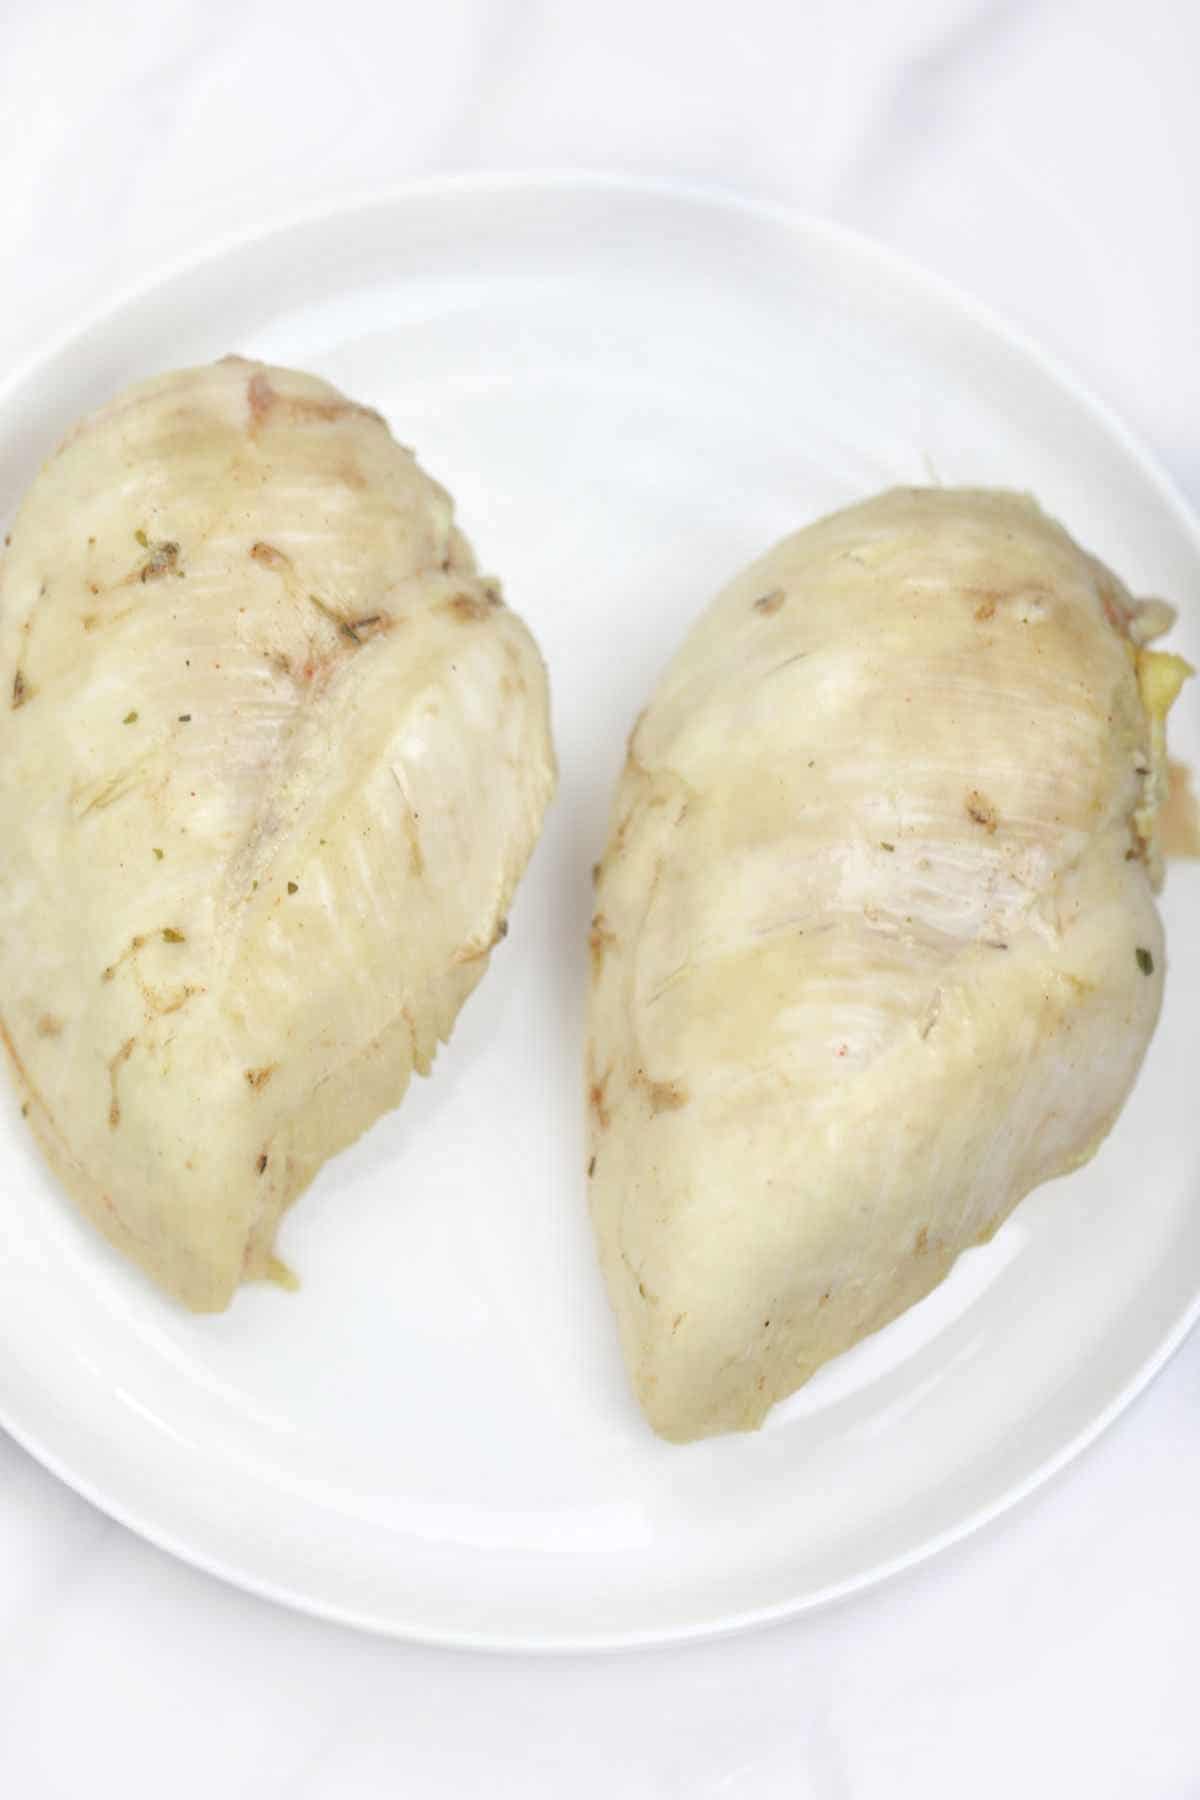 boiled chicken breasts served on a white plate.